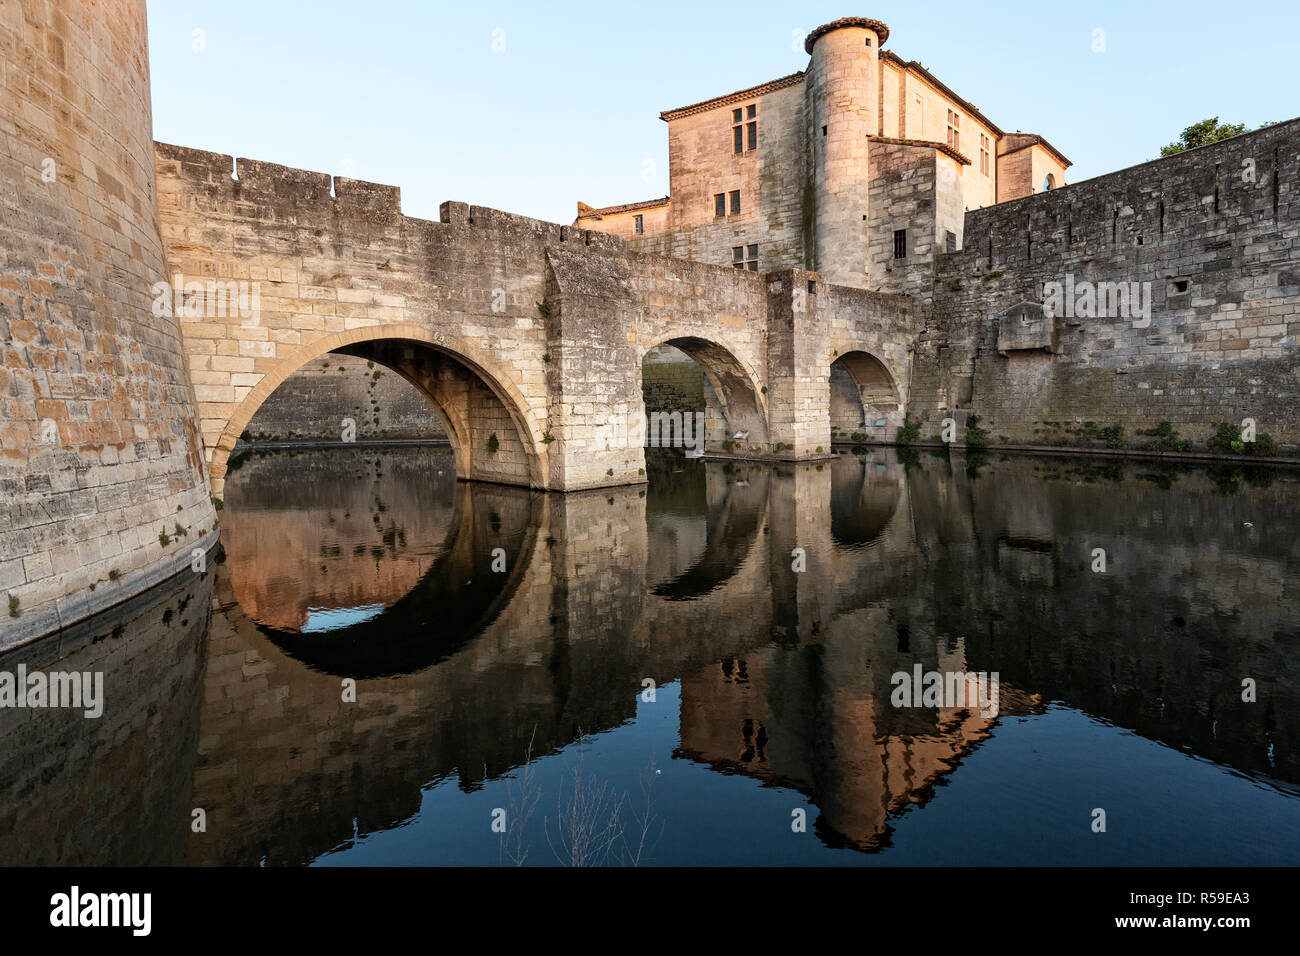 the historic fortress in aigues-mortes,southern france Stock Photo